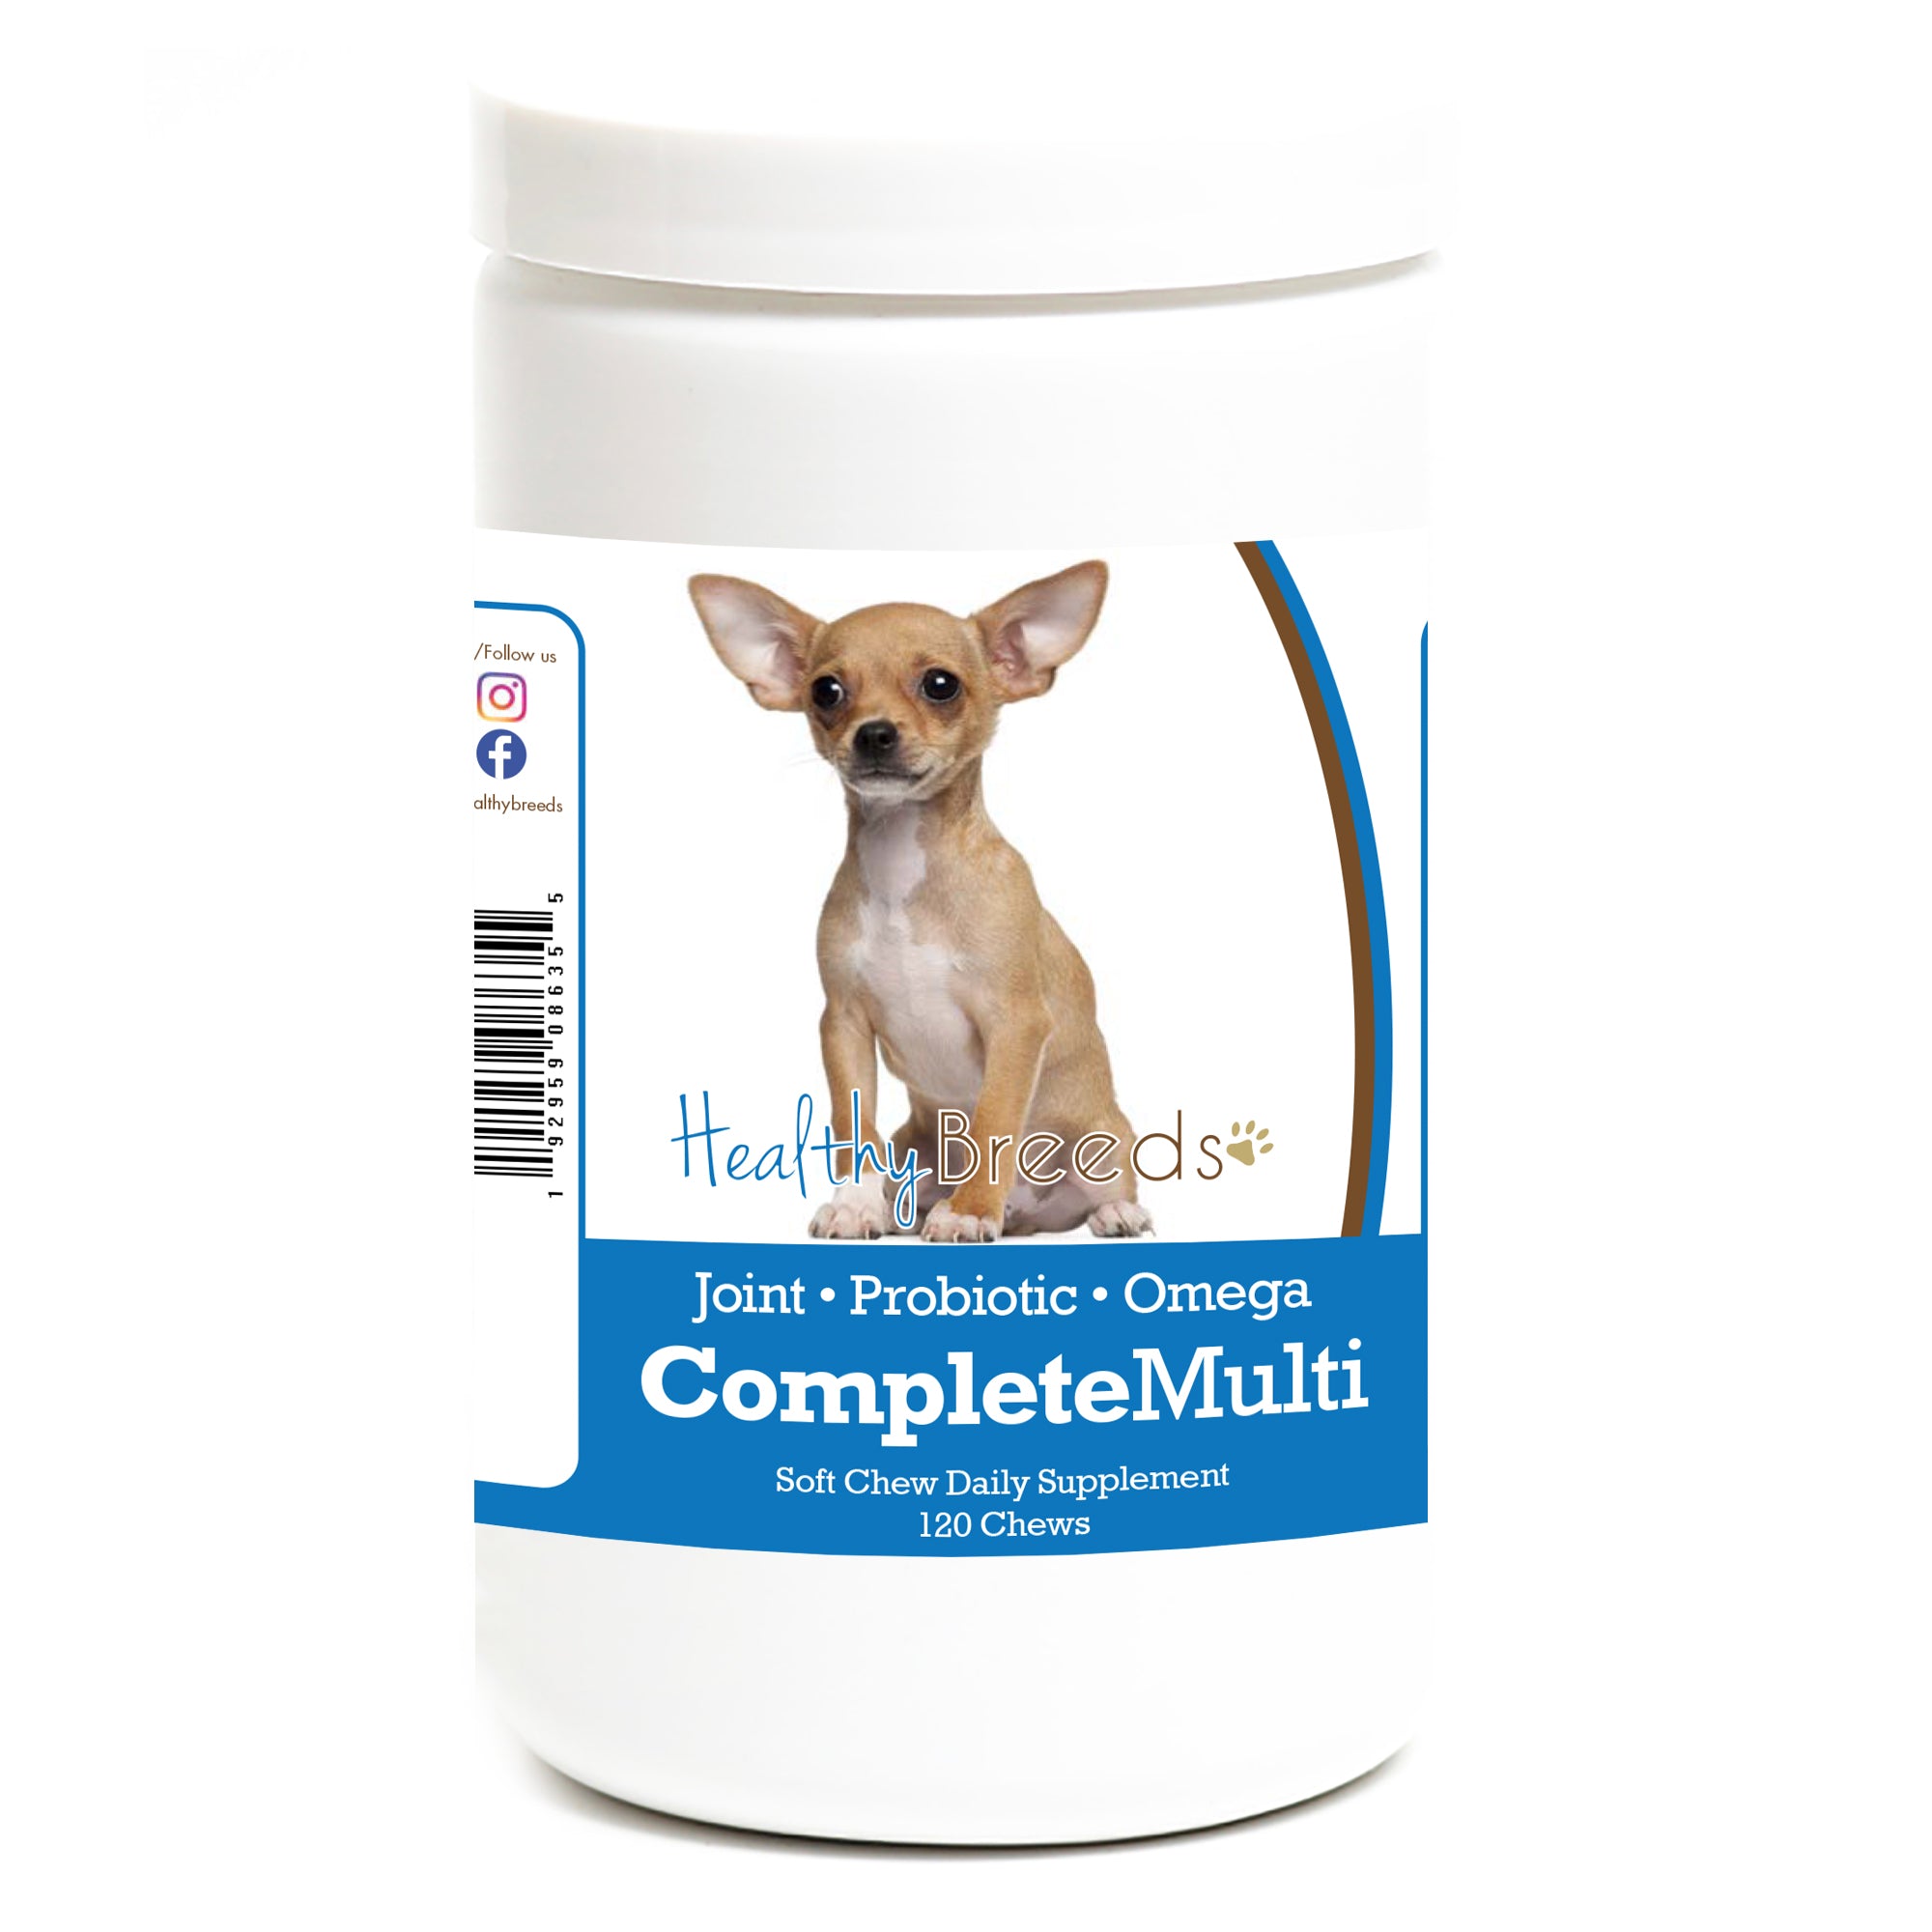 Chihuahua All In One Multivitamin Soft Chew 120 Count